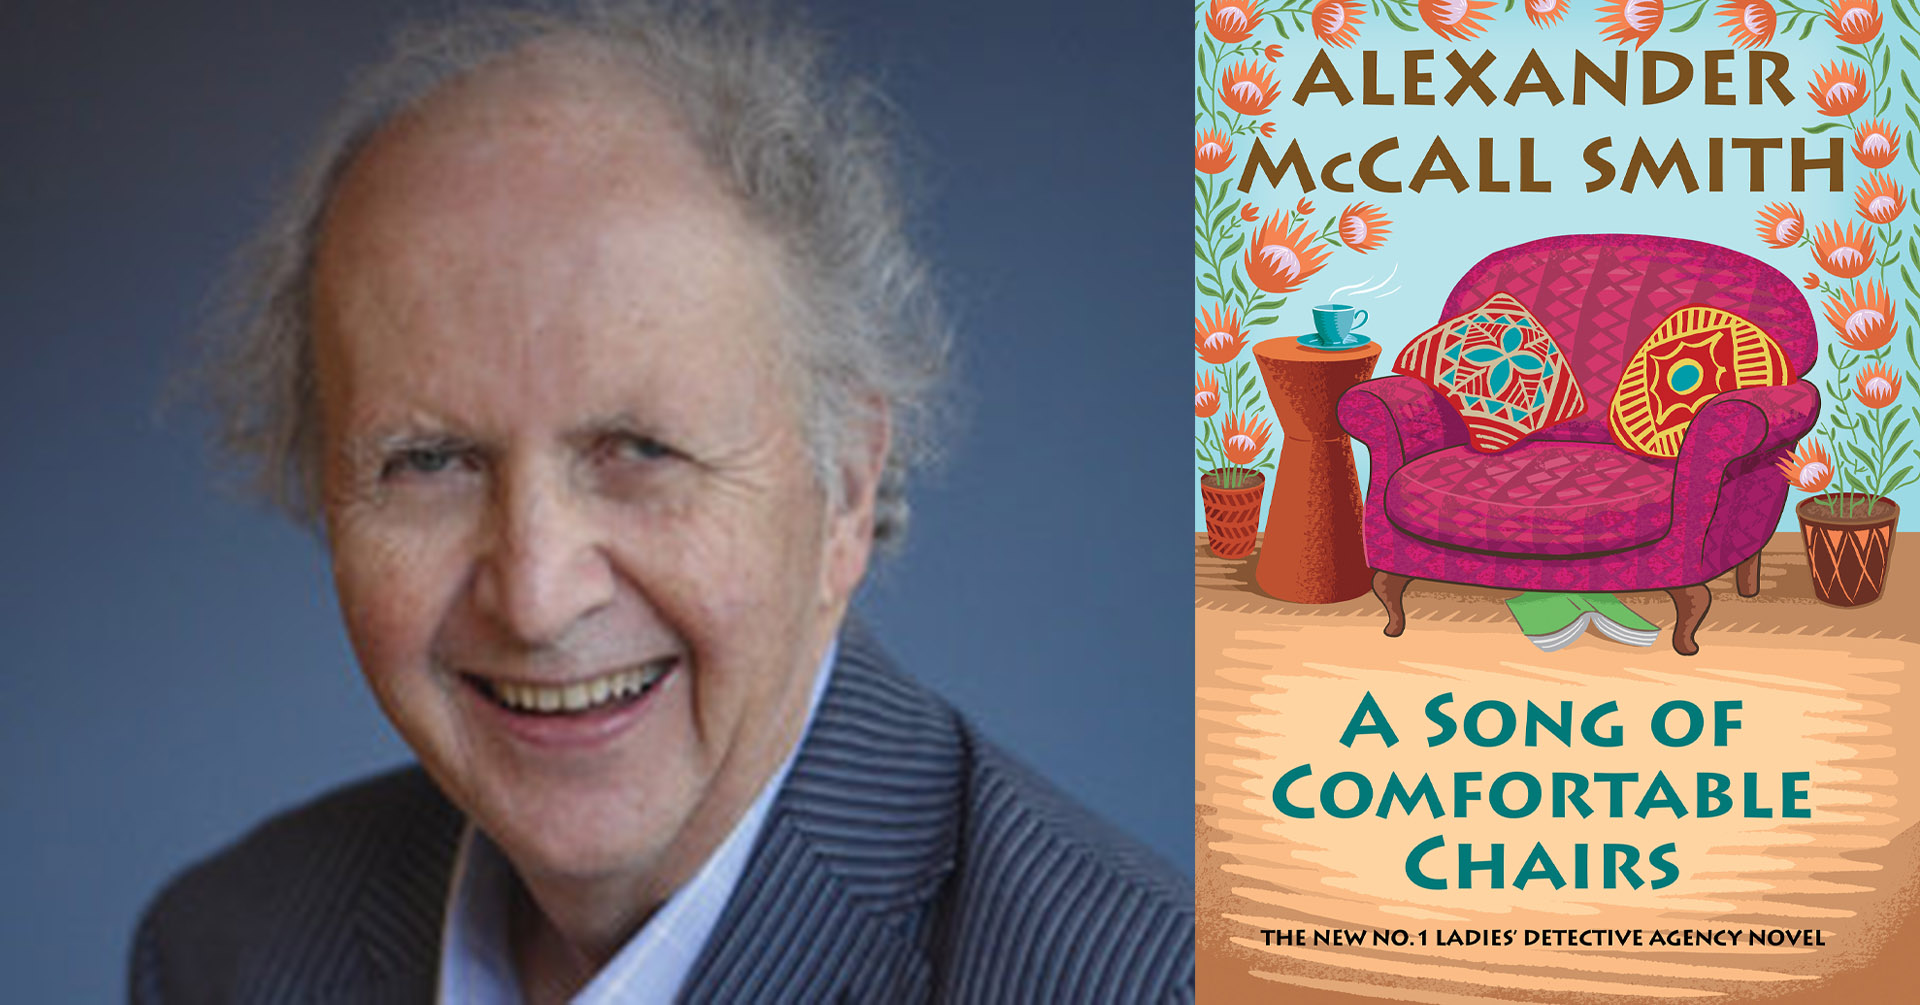 Alexander McCall Smith event image